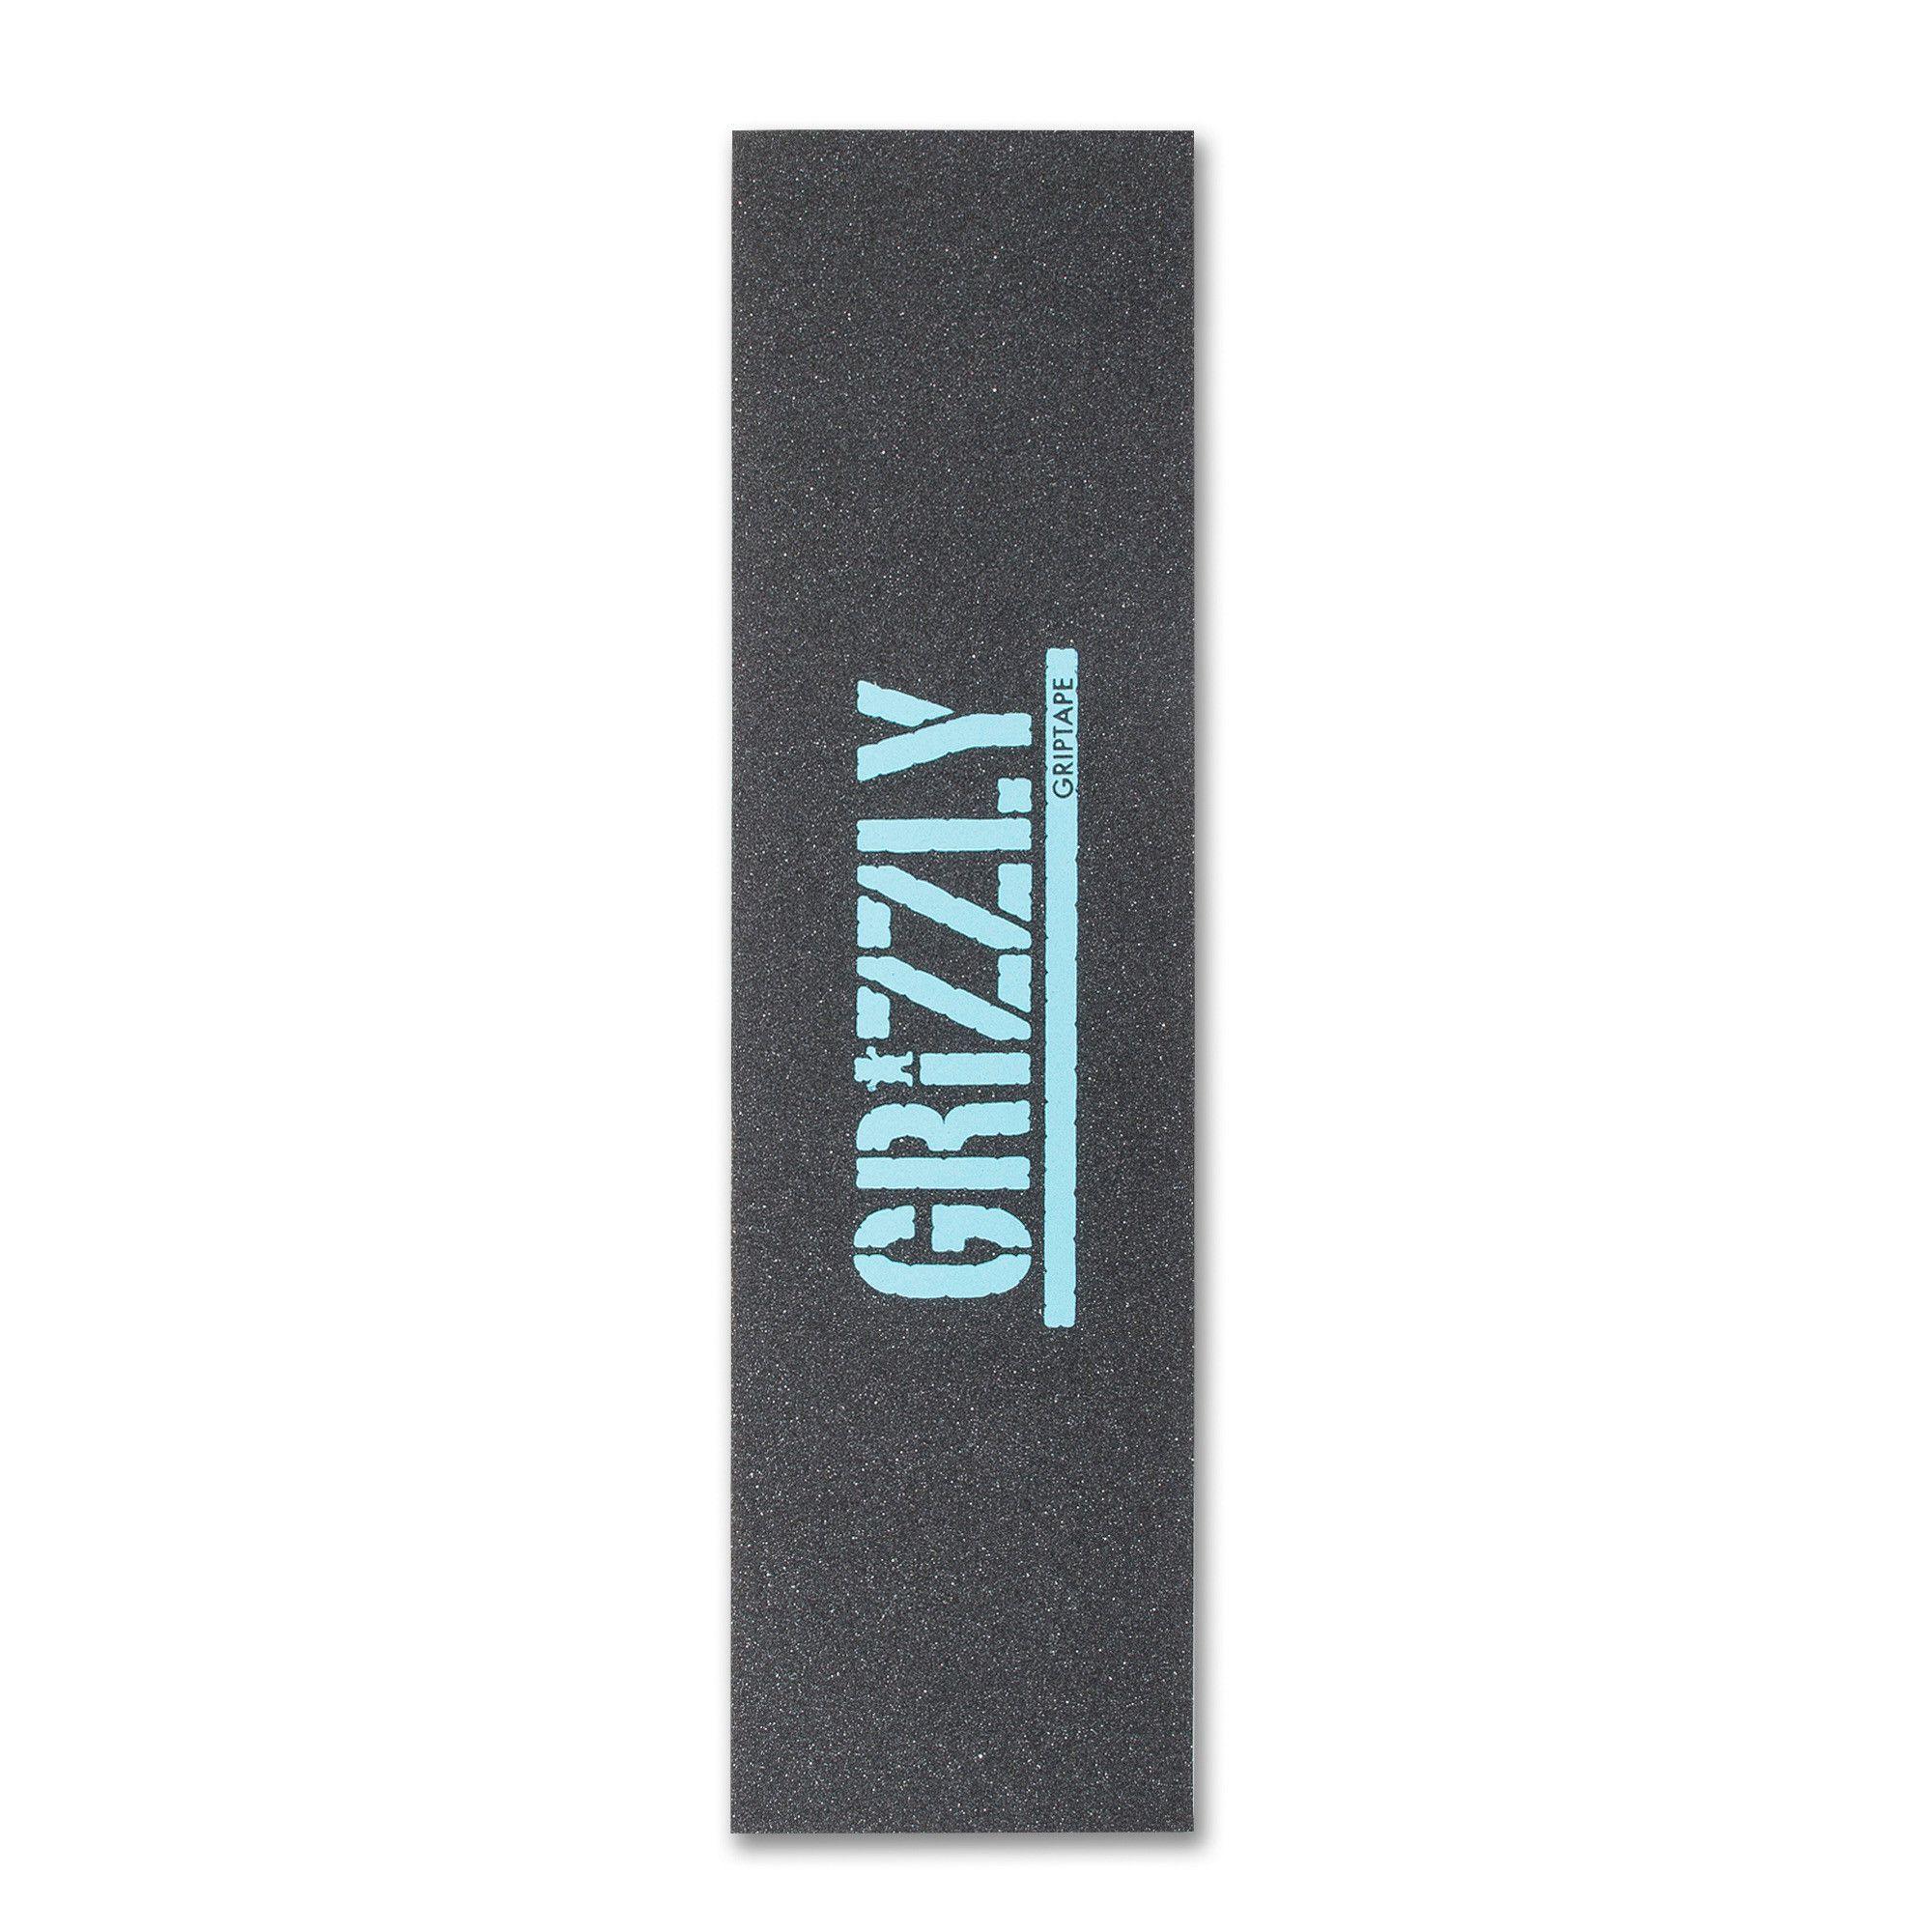 GRIZZLY GRIPTAPE